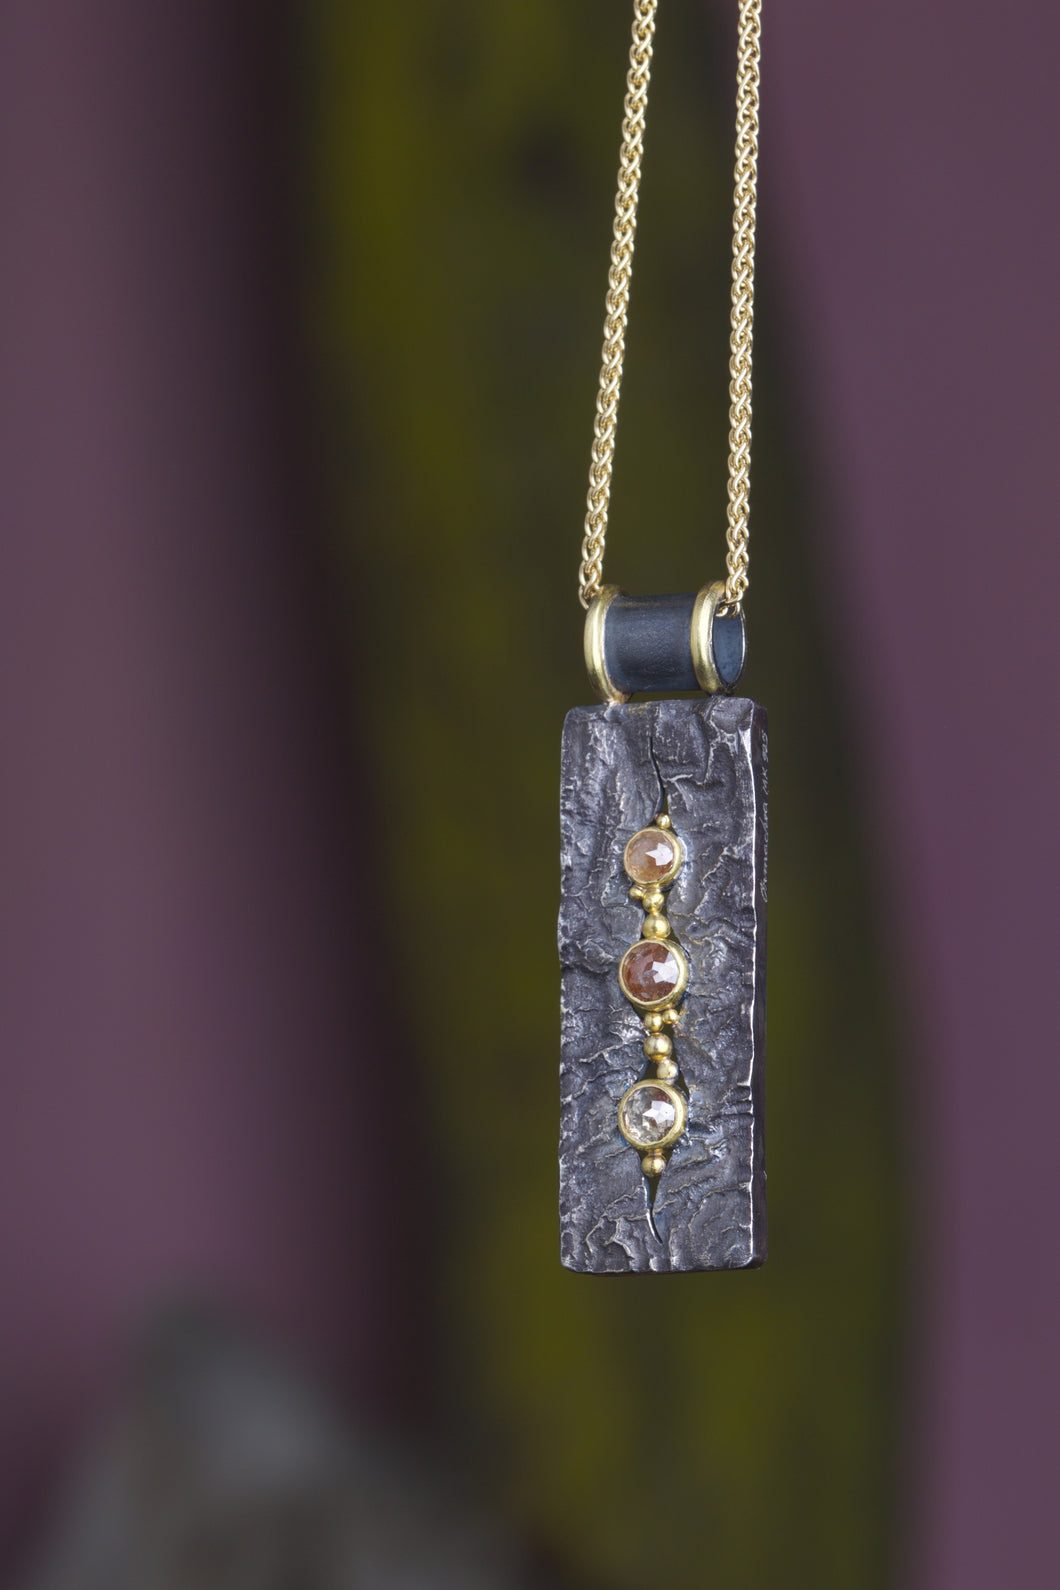 Rough Cut Diamonds and Mixed Metal Pendant 06748 - Ormachea Jewelry